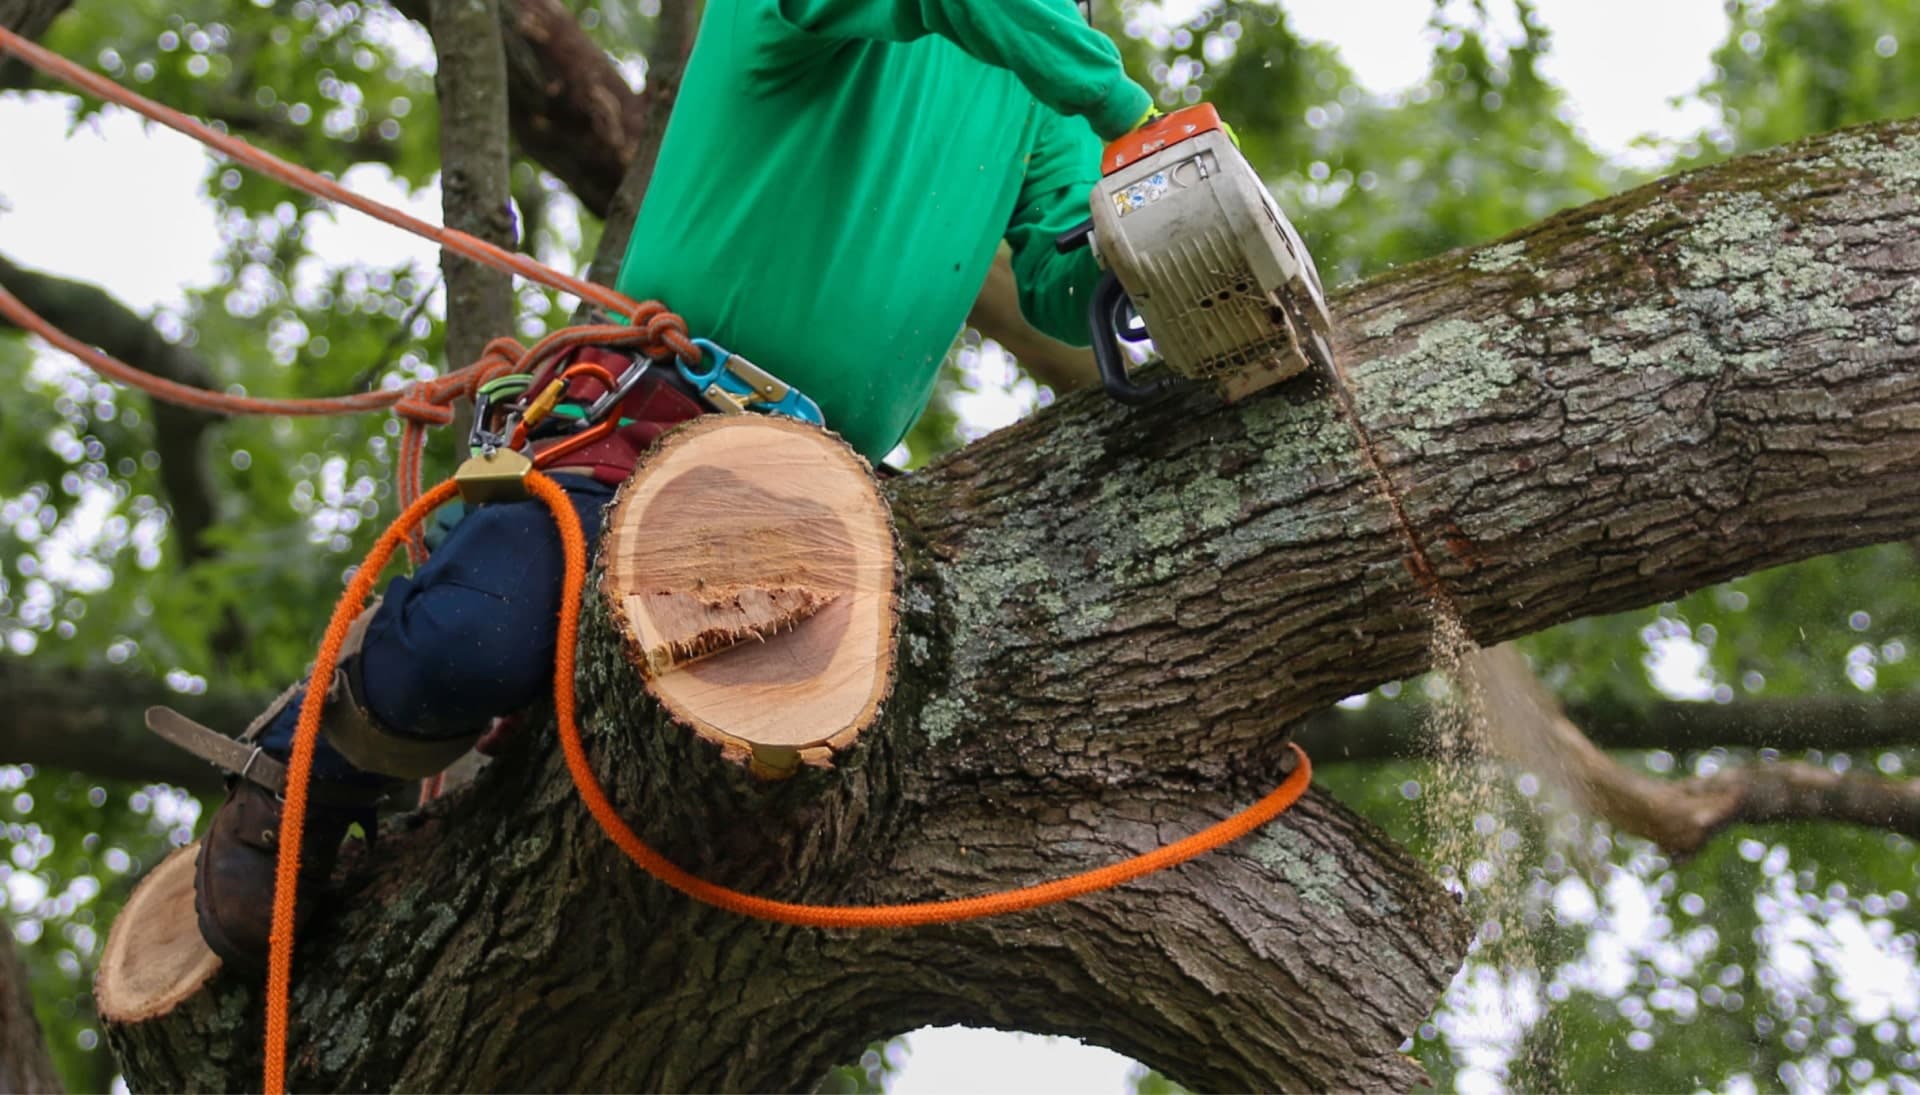 Shed your worries away with best tree removal in Grand Junction